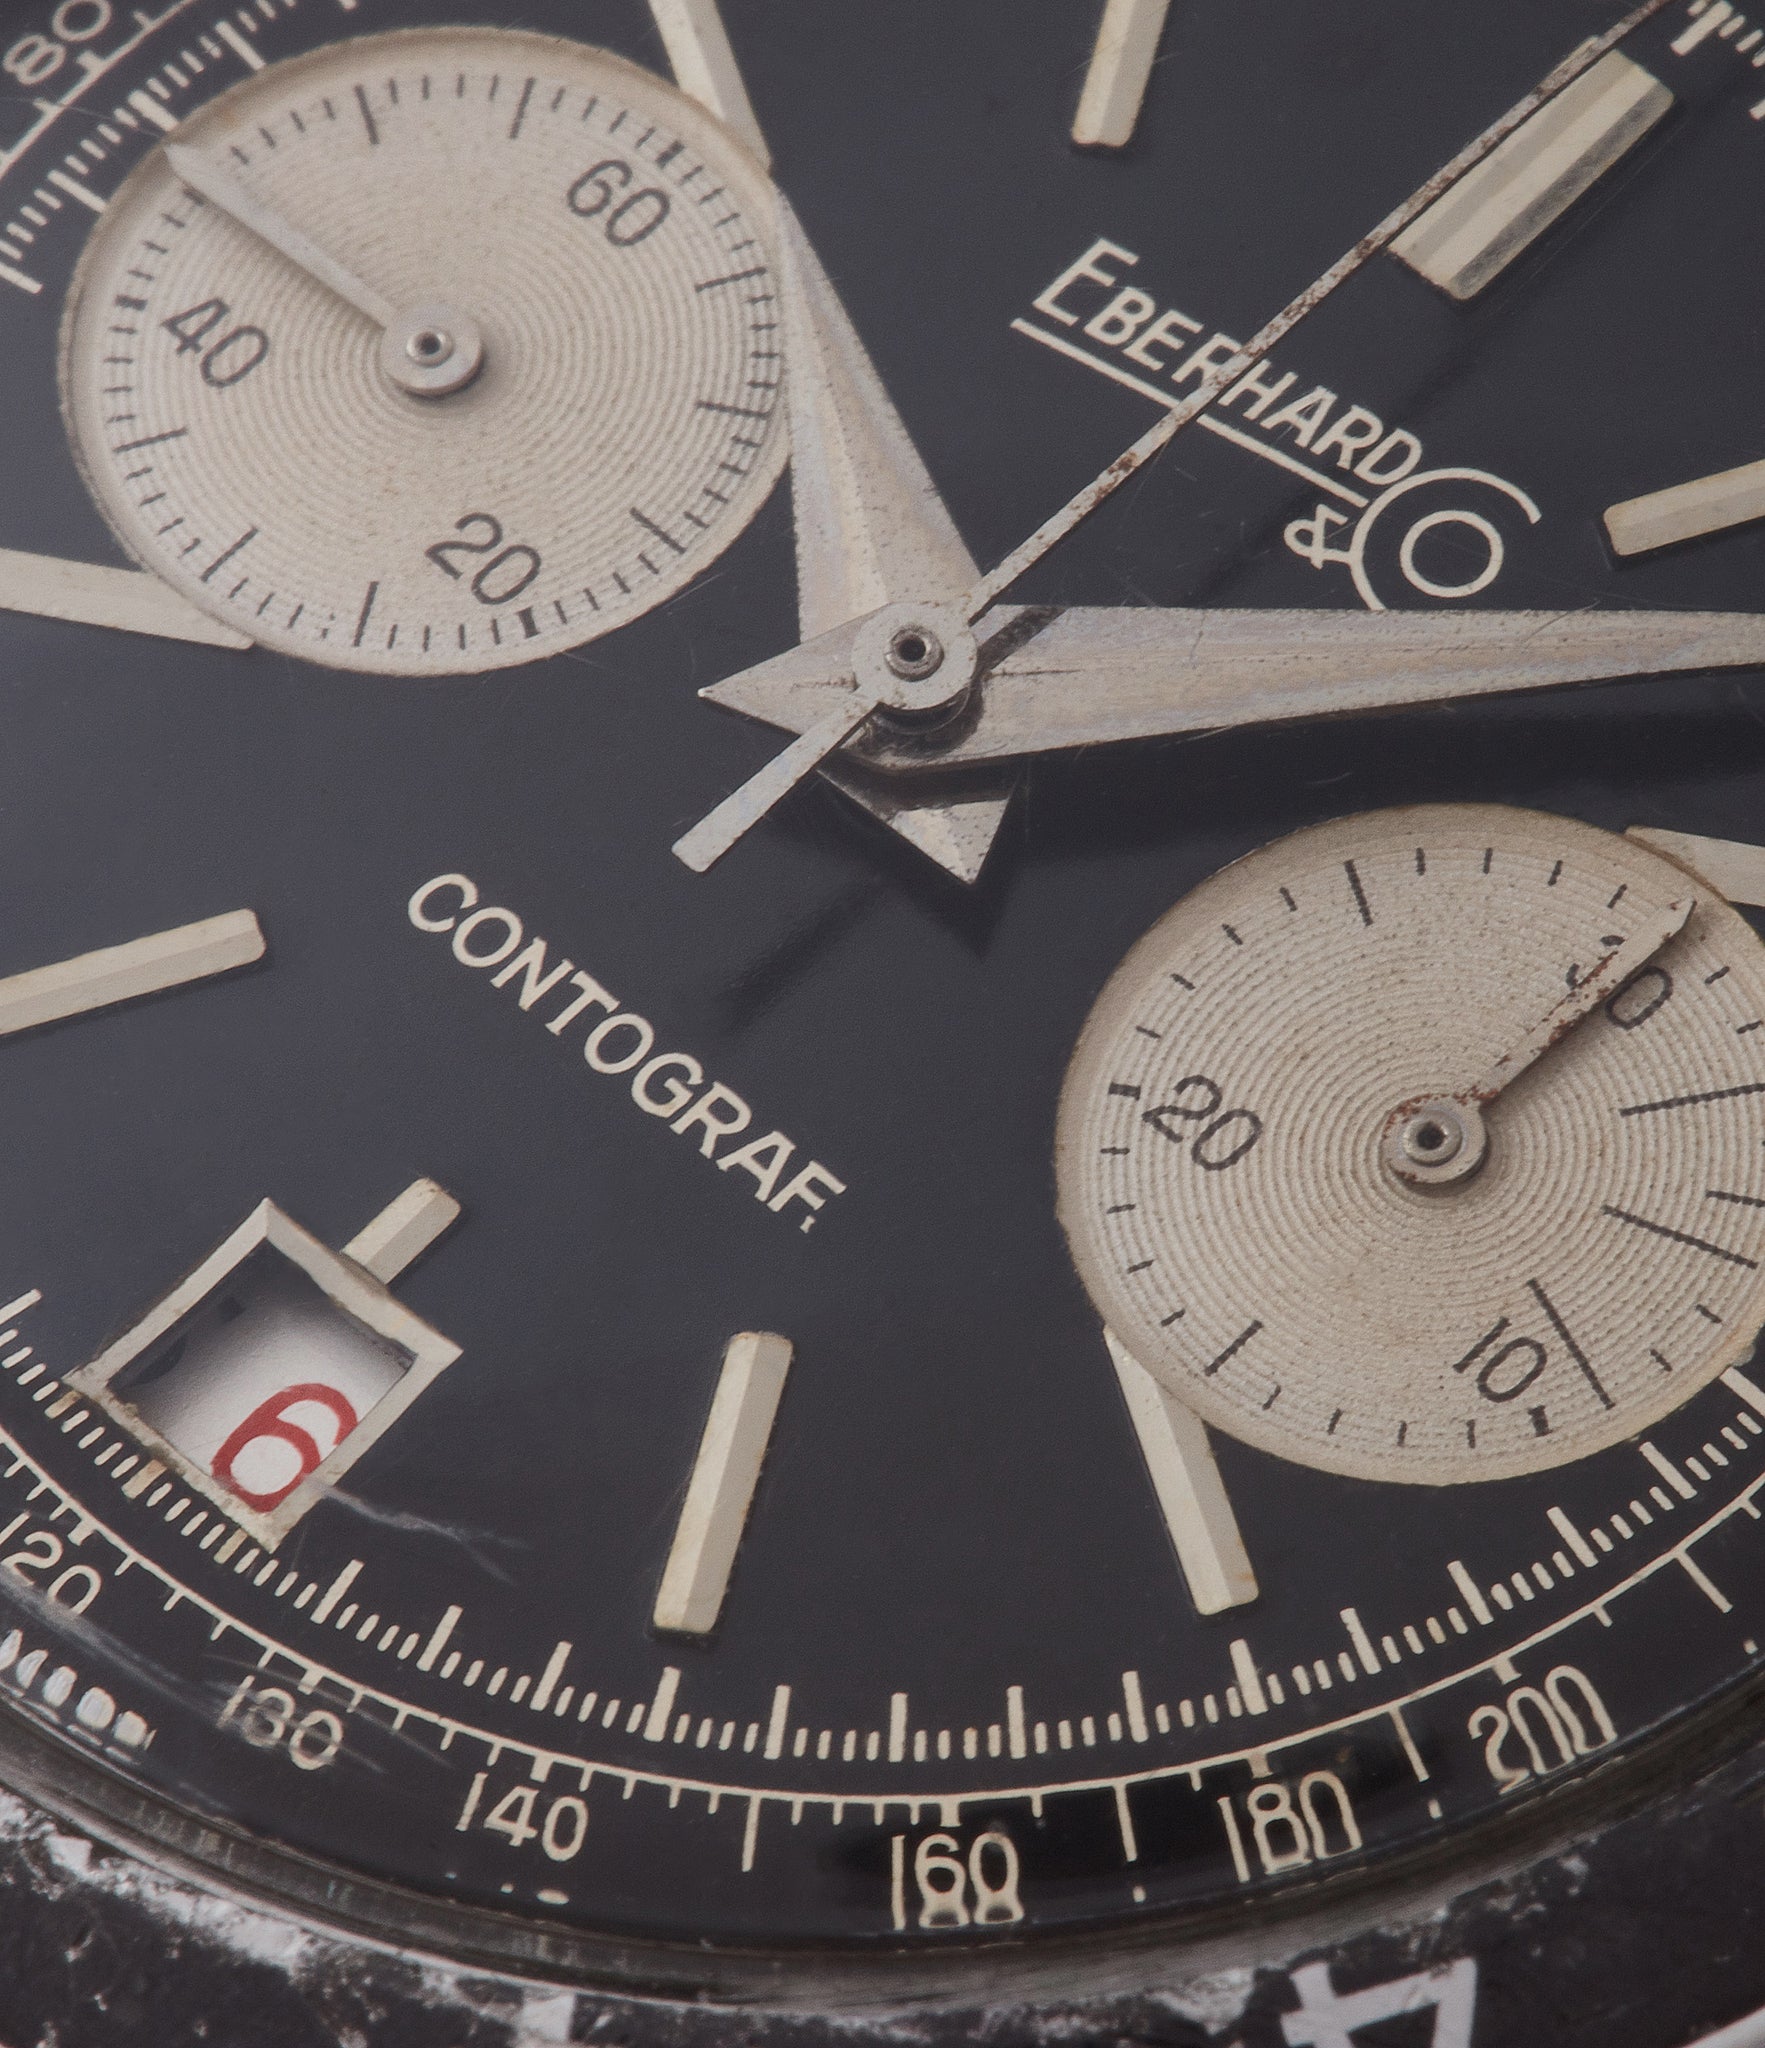 vintage date chronograph watch Eberhard Contograf for sale online at A Collected Man London UK specialist of rare watches